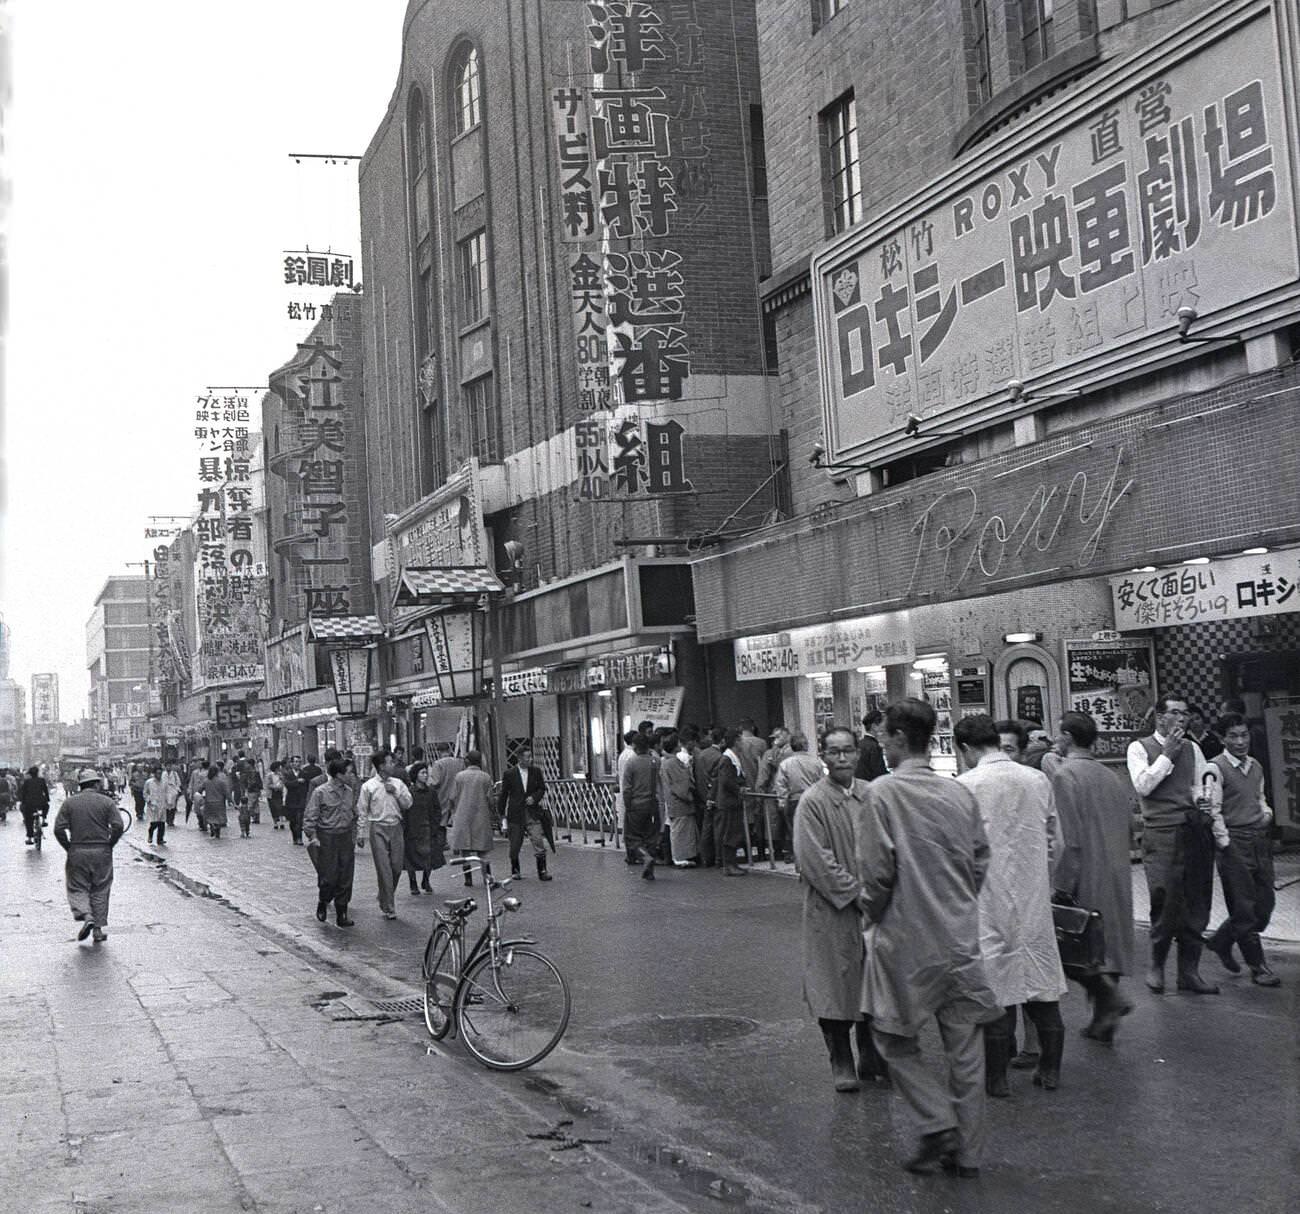 Men in raincoats walking along a wide pavement outside past the Roxy movie theatre, 1950s.